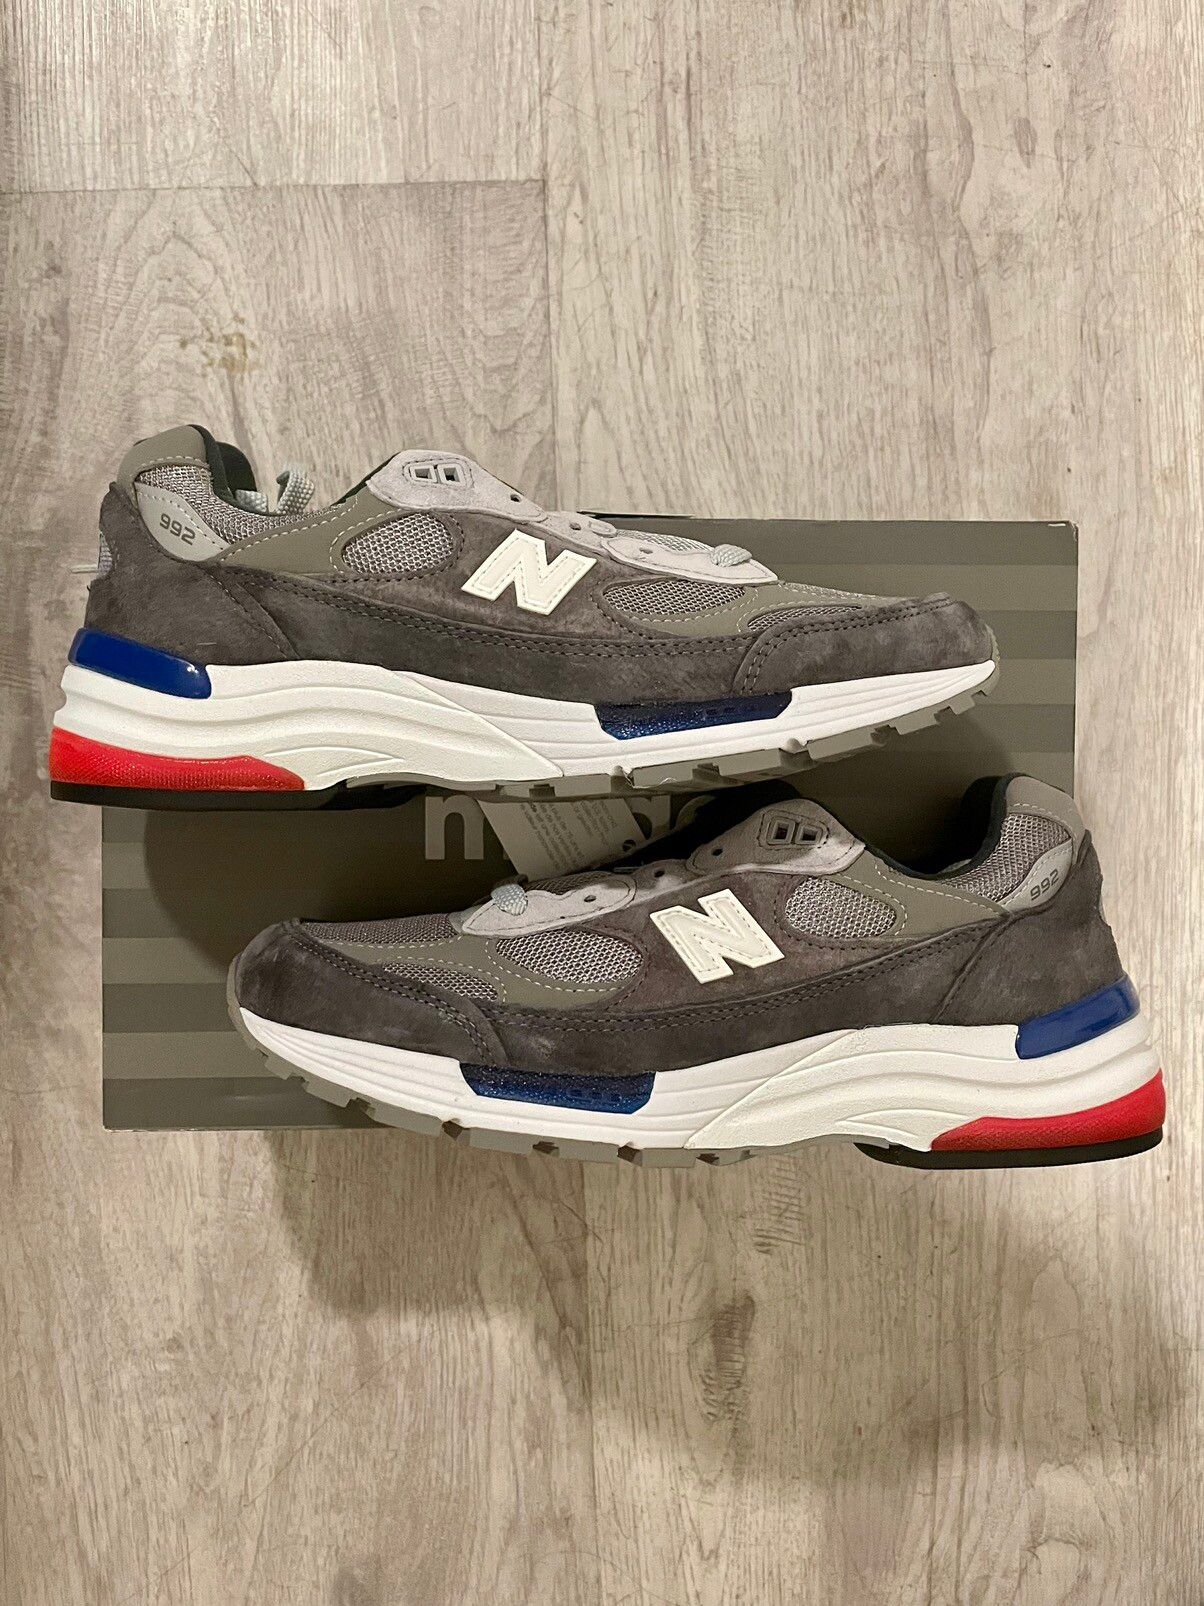 New Balance 992 AG New Balance Made In USA M992AG Grey Gray Blue Red |  Grailed